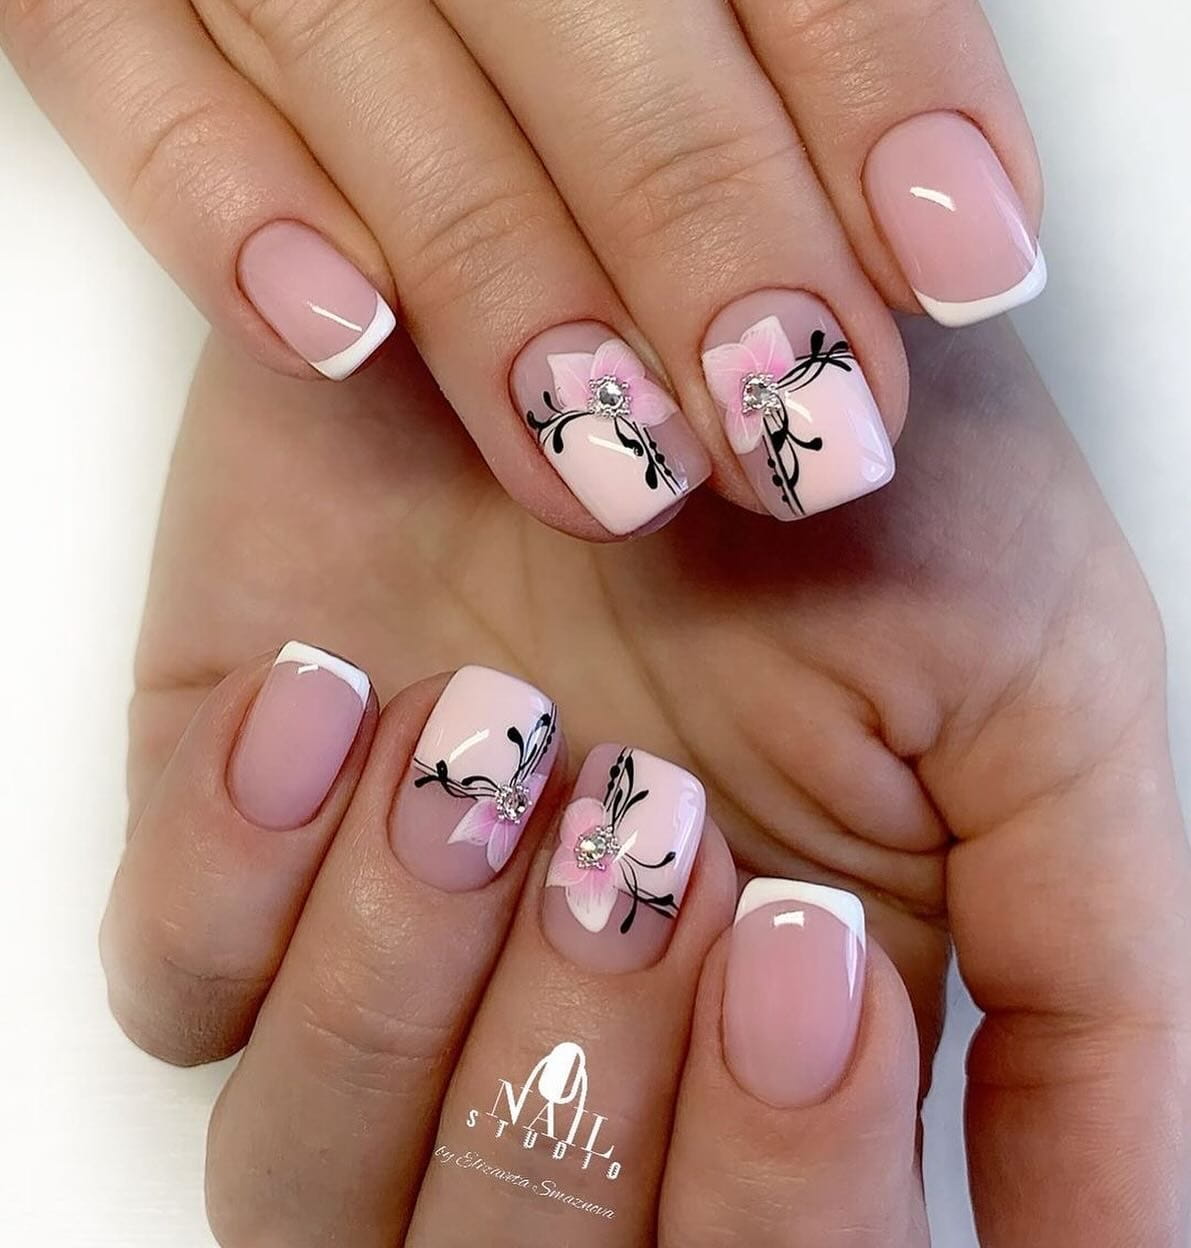 100+ Short Nail Designs You’ll Want To Try This Year images 20